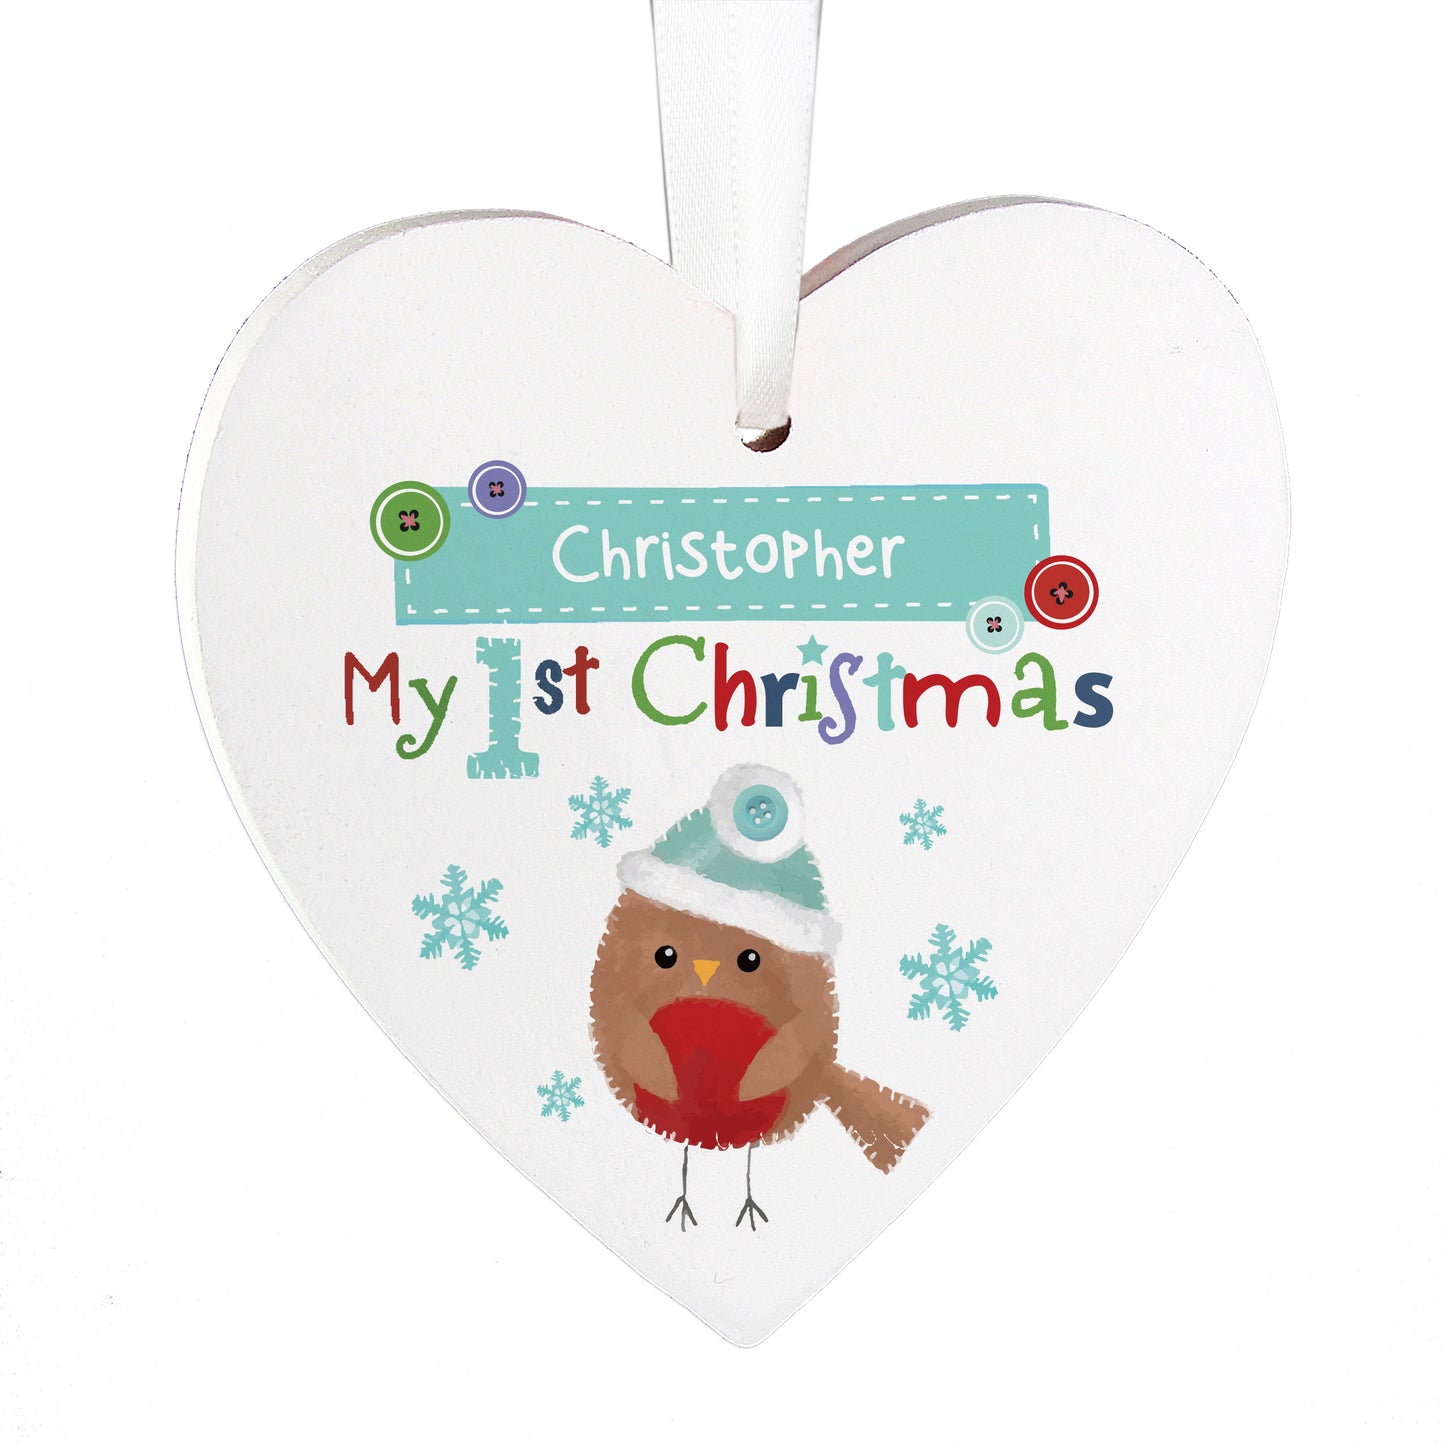 Personalised Felt Stitch Robin 'My 1st Christmas' Wooden Heart Decoration - Personalise It!